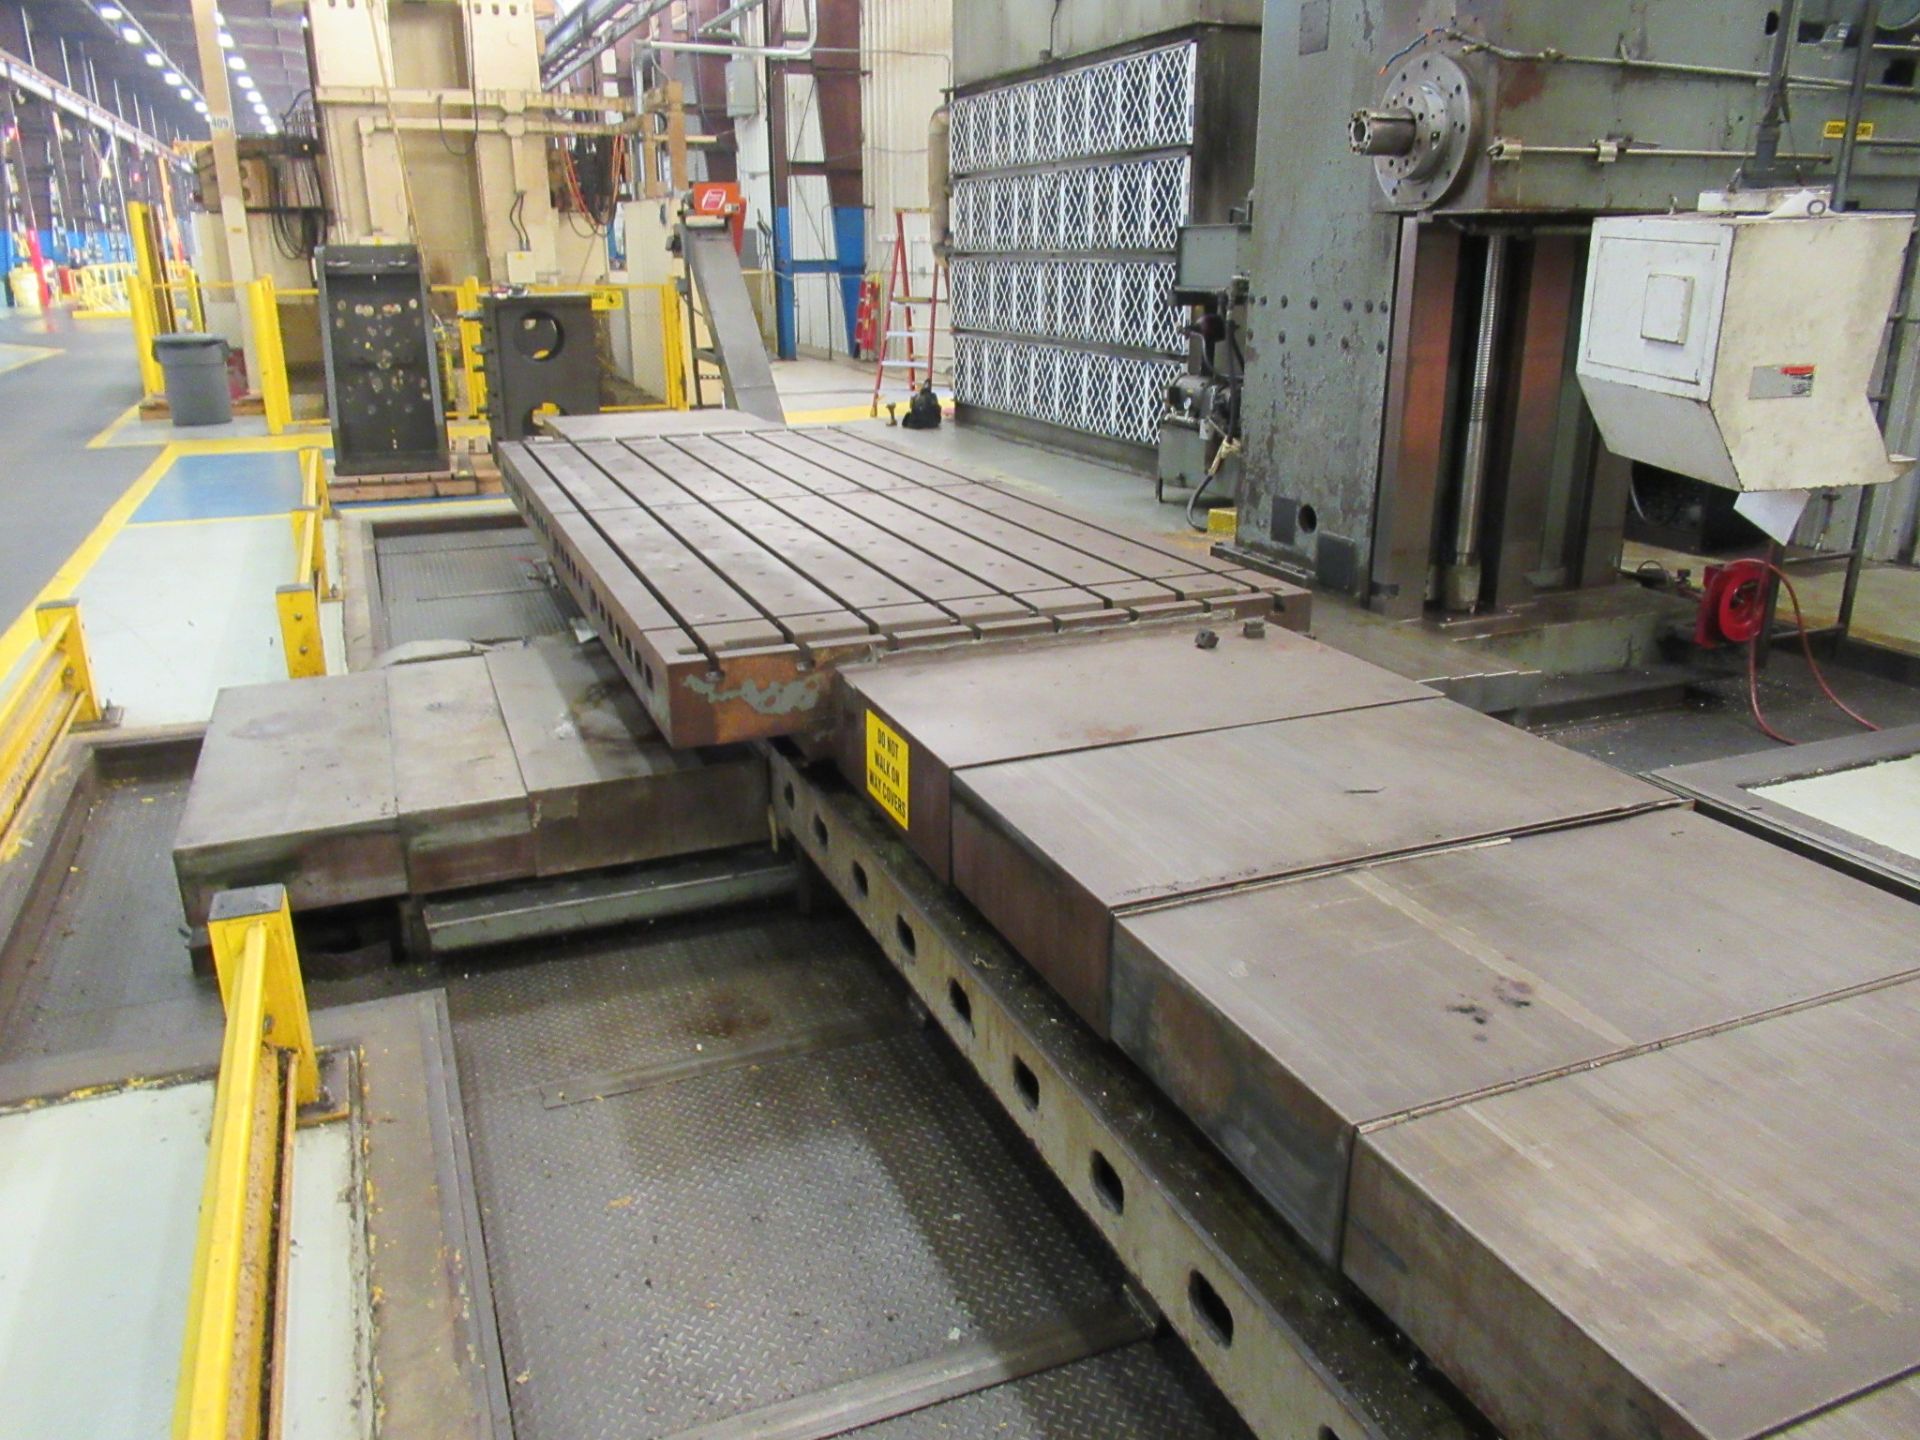 CNC HORIZONTAL BORING MILL, 6" GIDDINGS & LEWIS MDL. H60-T, 60" x 120" plain table, 168" X, 156" Y- - Image 2 of 12